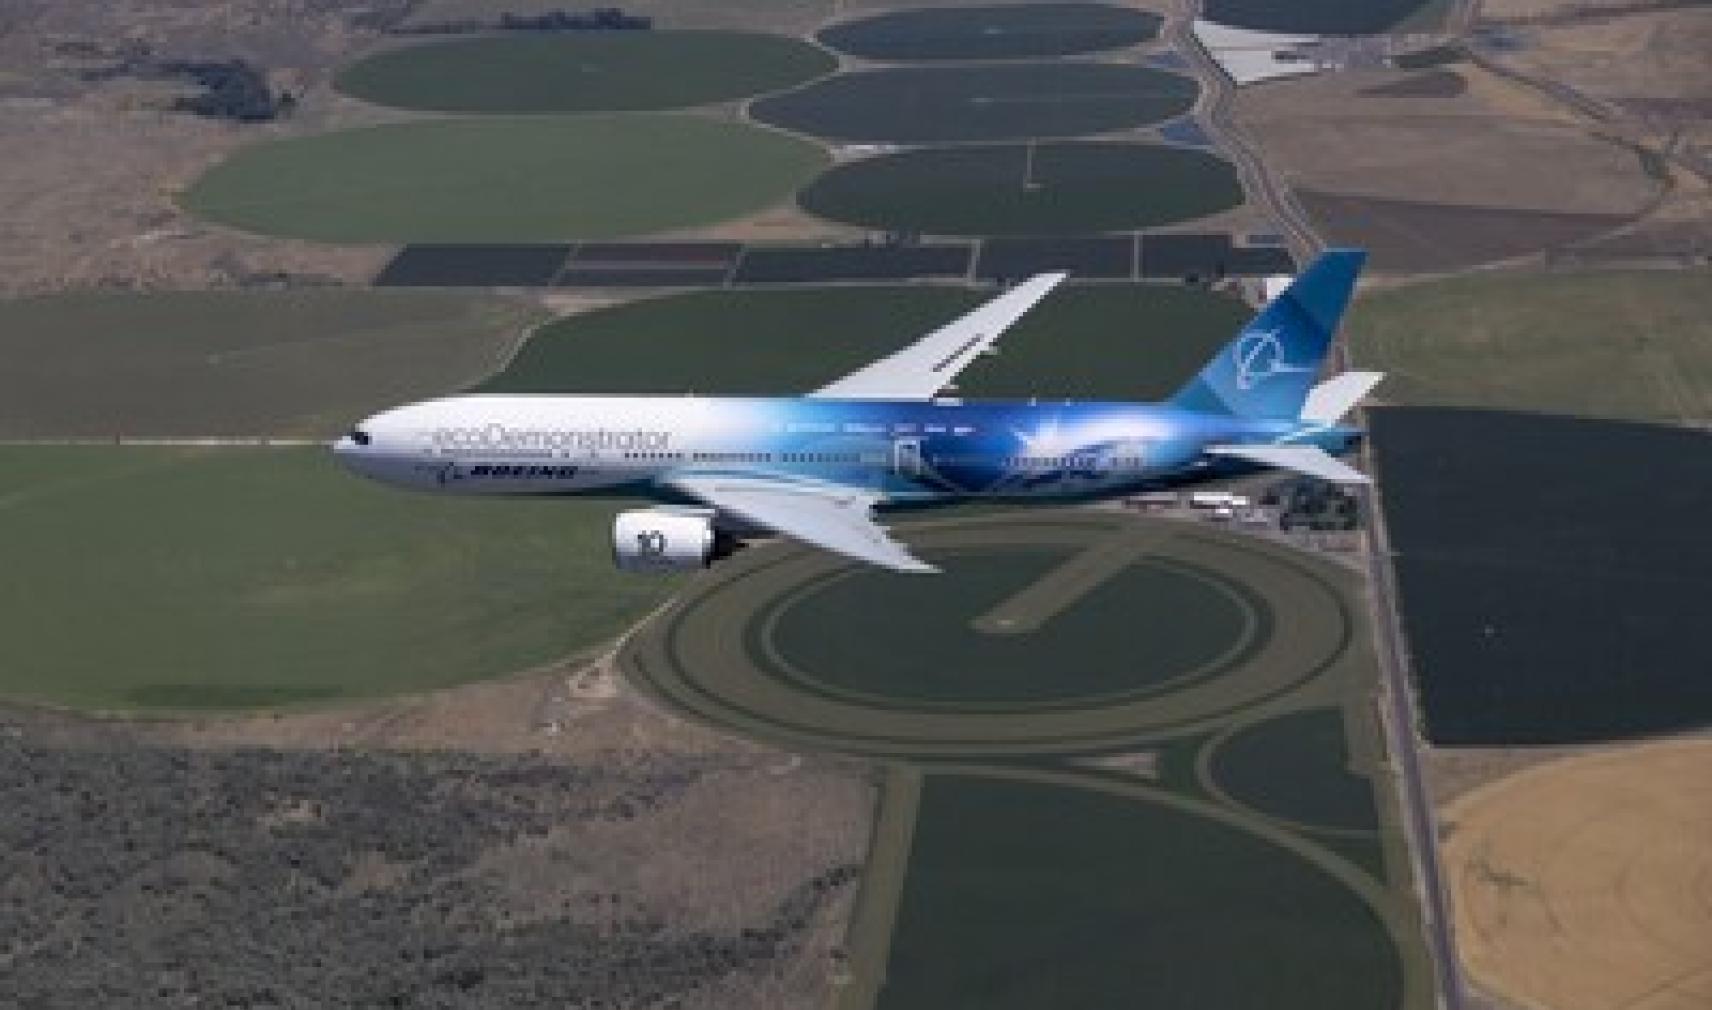 The Boeing 777-200ER is one of a number of commercial airplanes to test a lidar-based turbulence detection system as part of the ecoDemonstrator programme